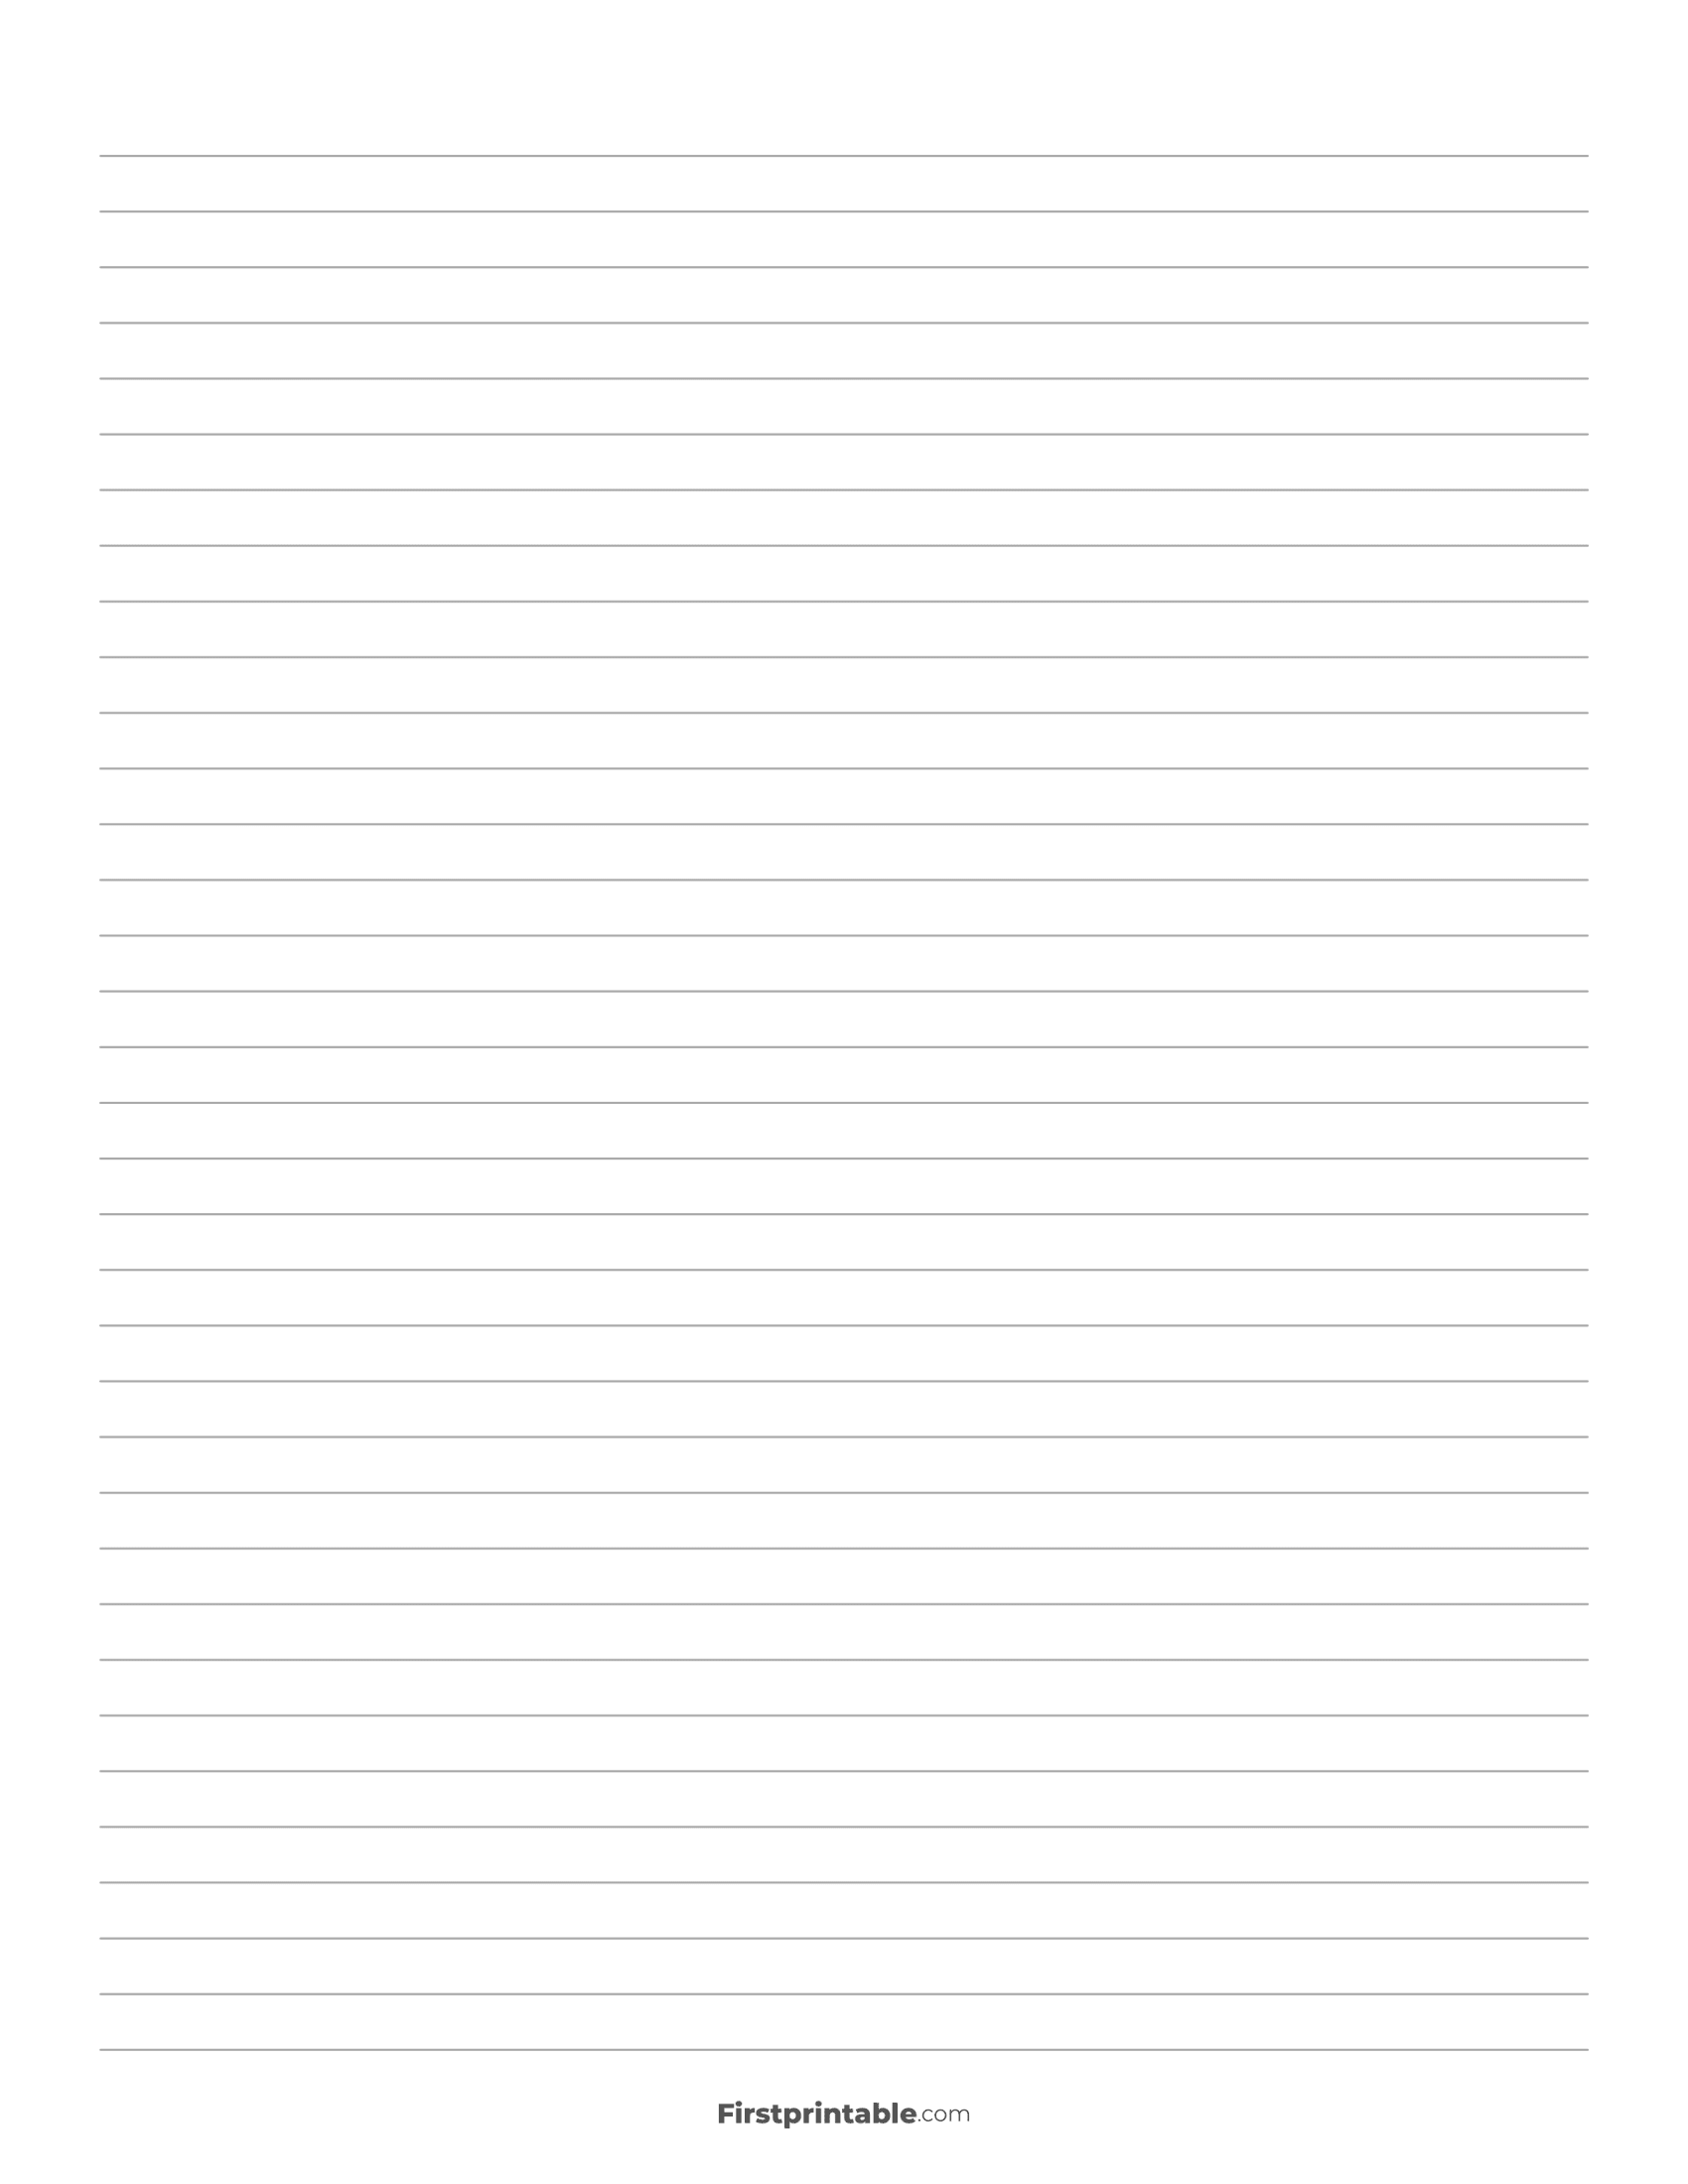 Printable Lined Paper Template - College Ruled